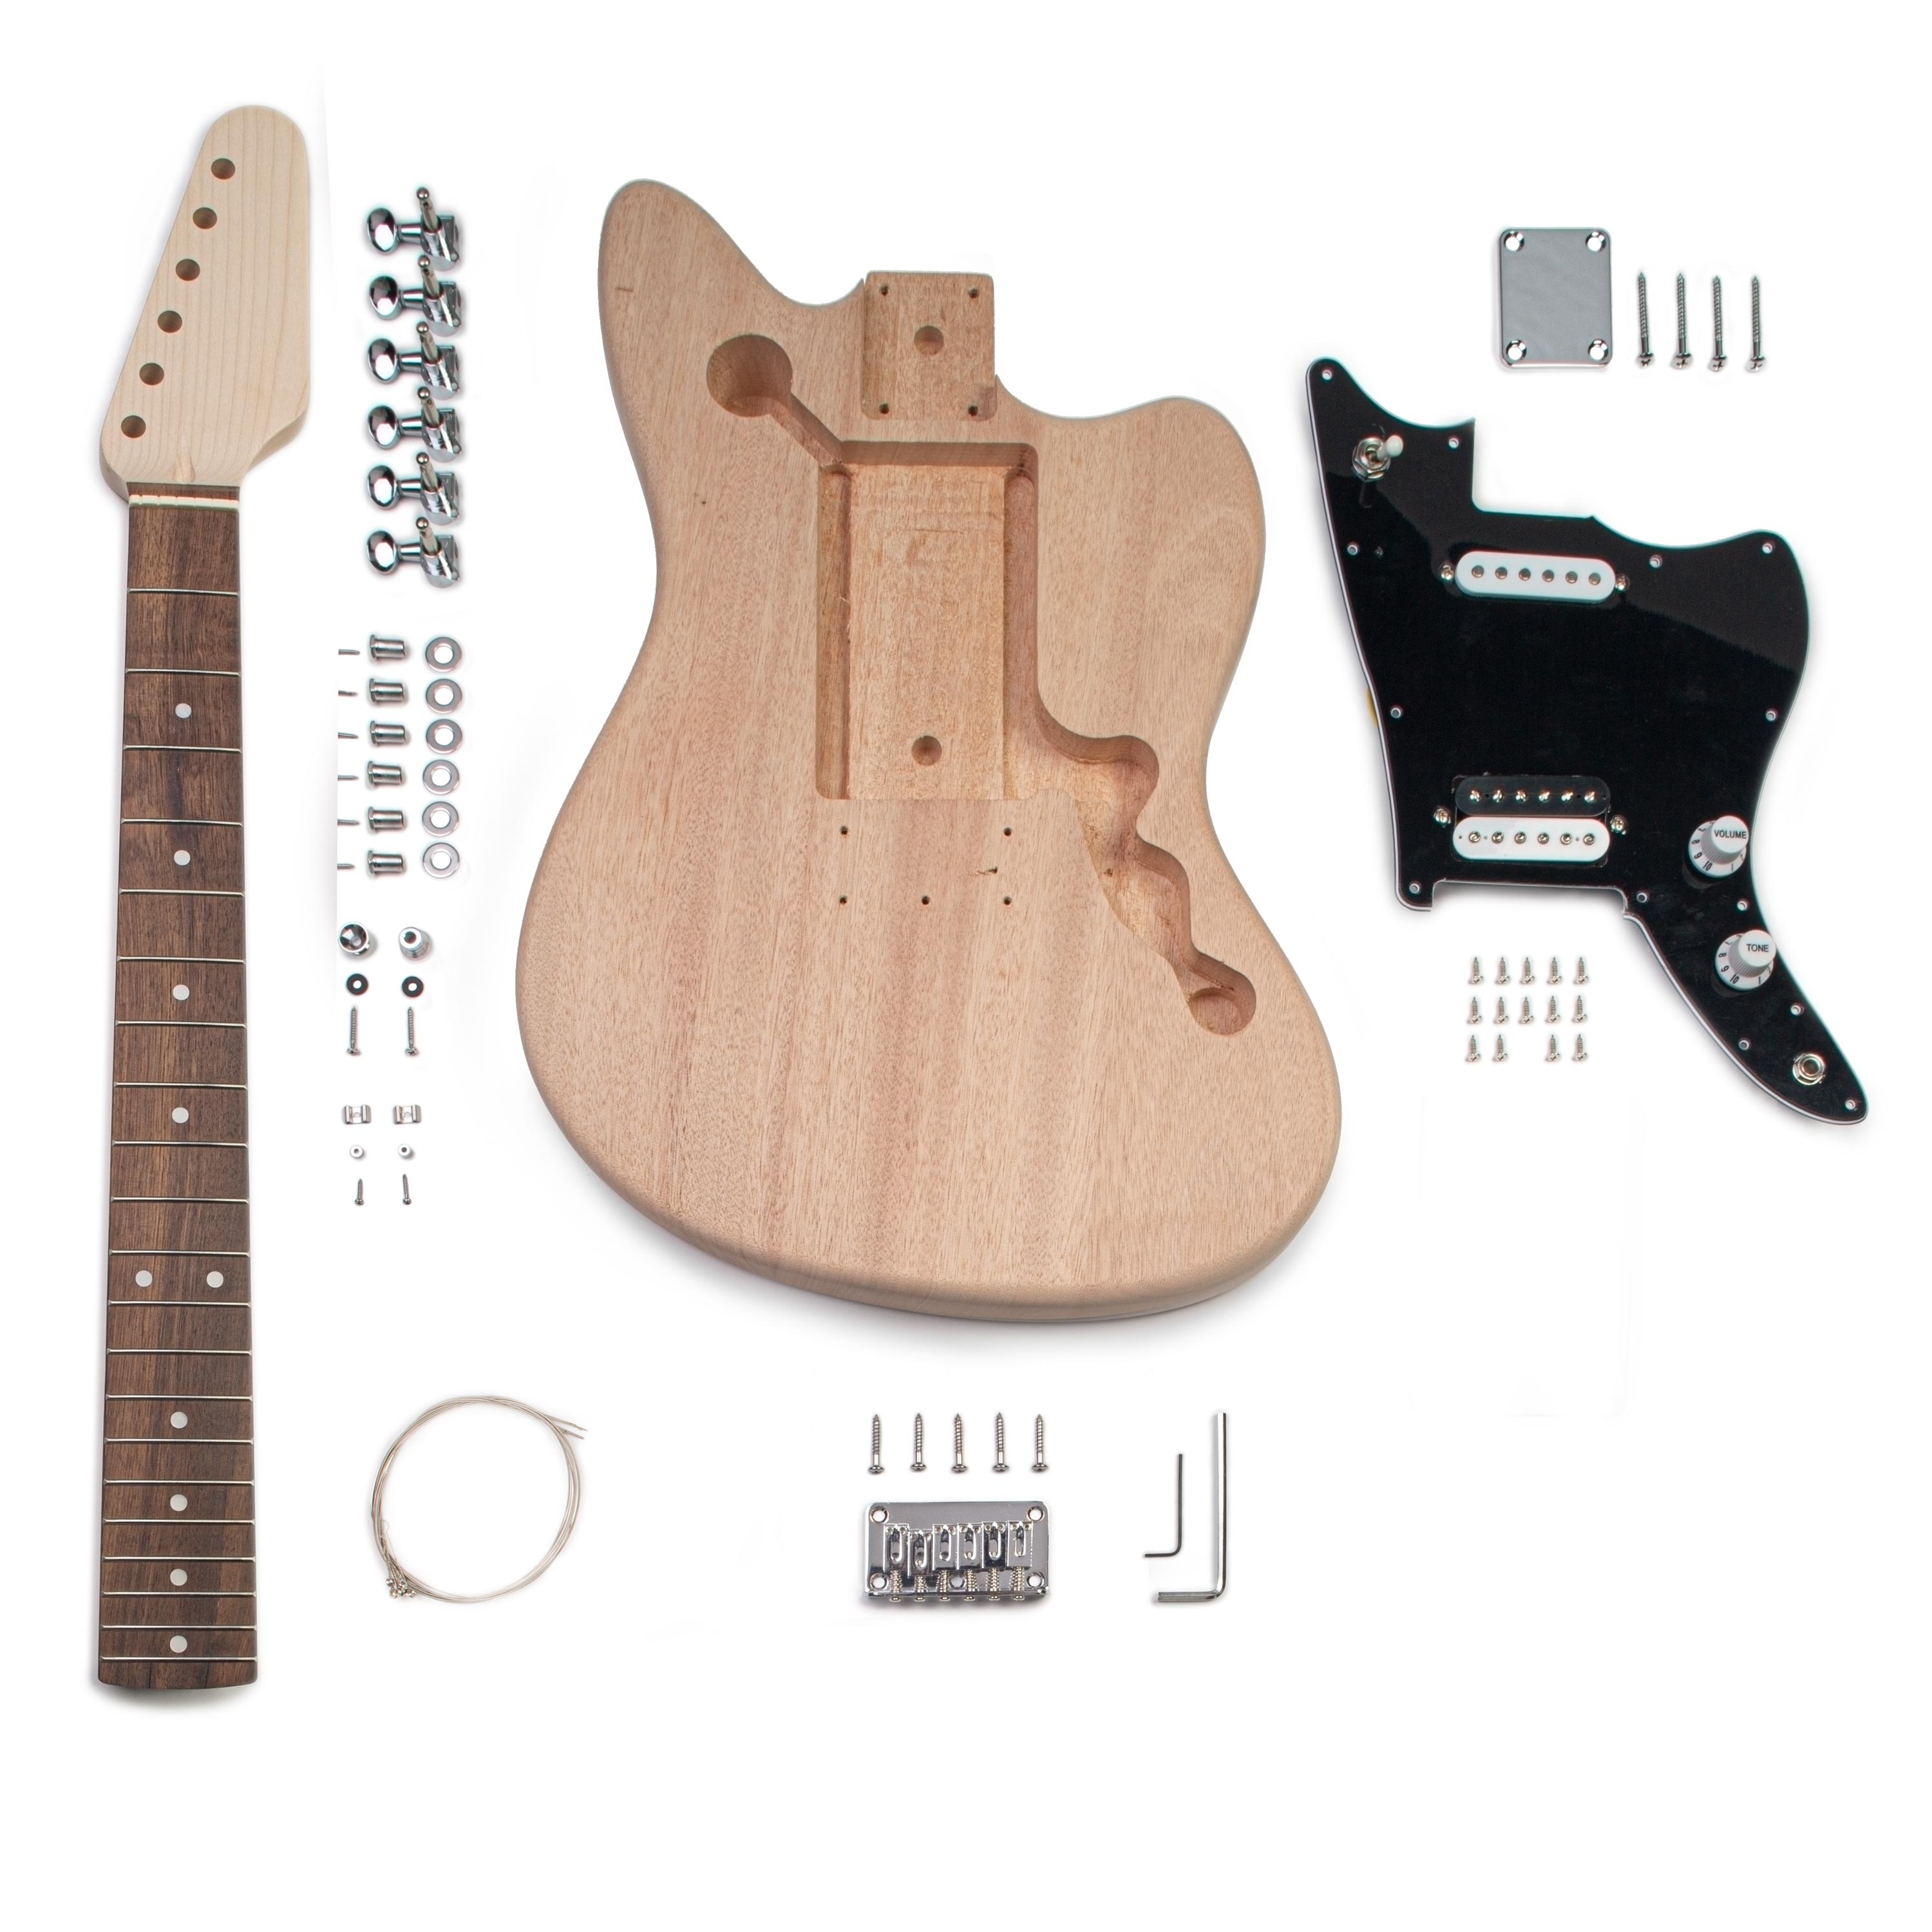 High Quality Guitar Kit - Offset Hardtail Electric Guitar Kit from StewMac.